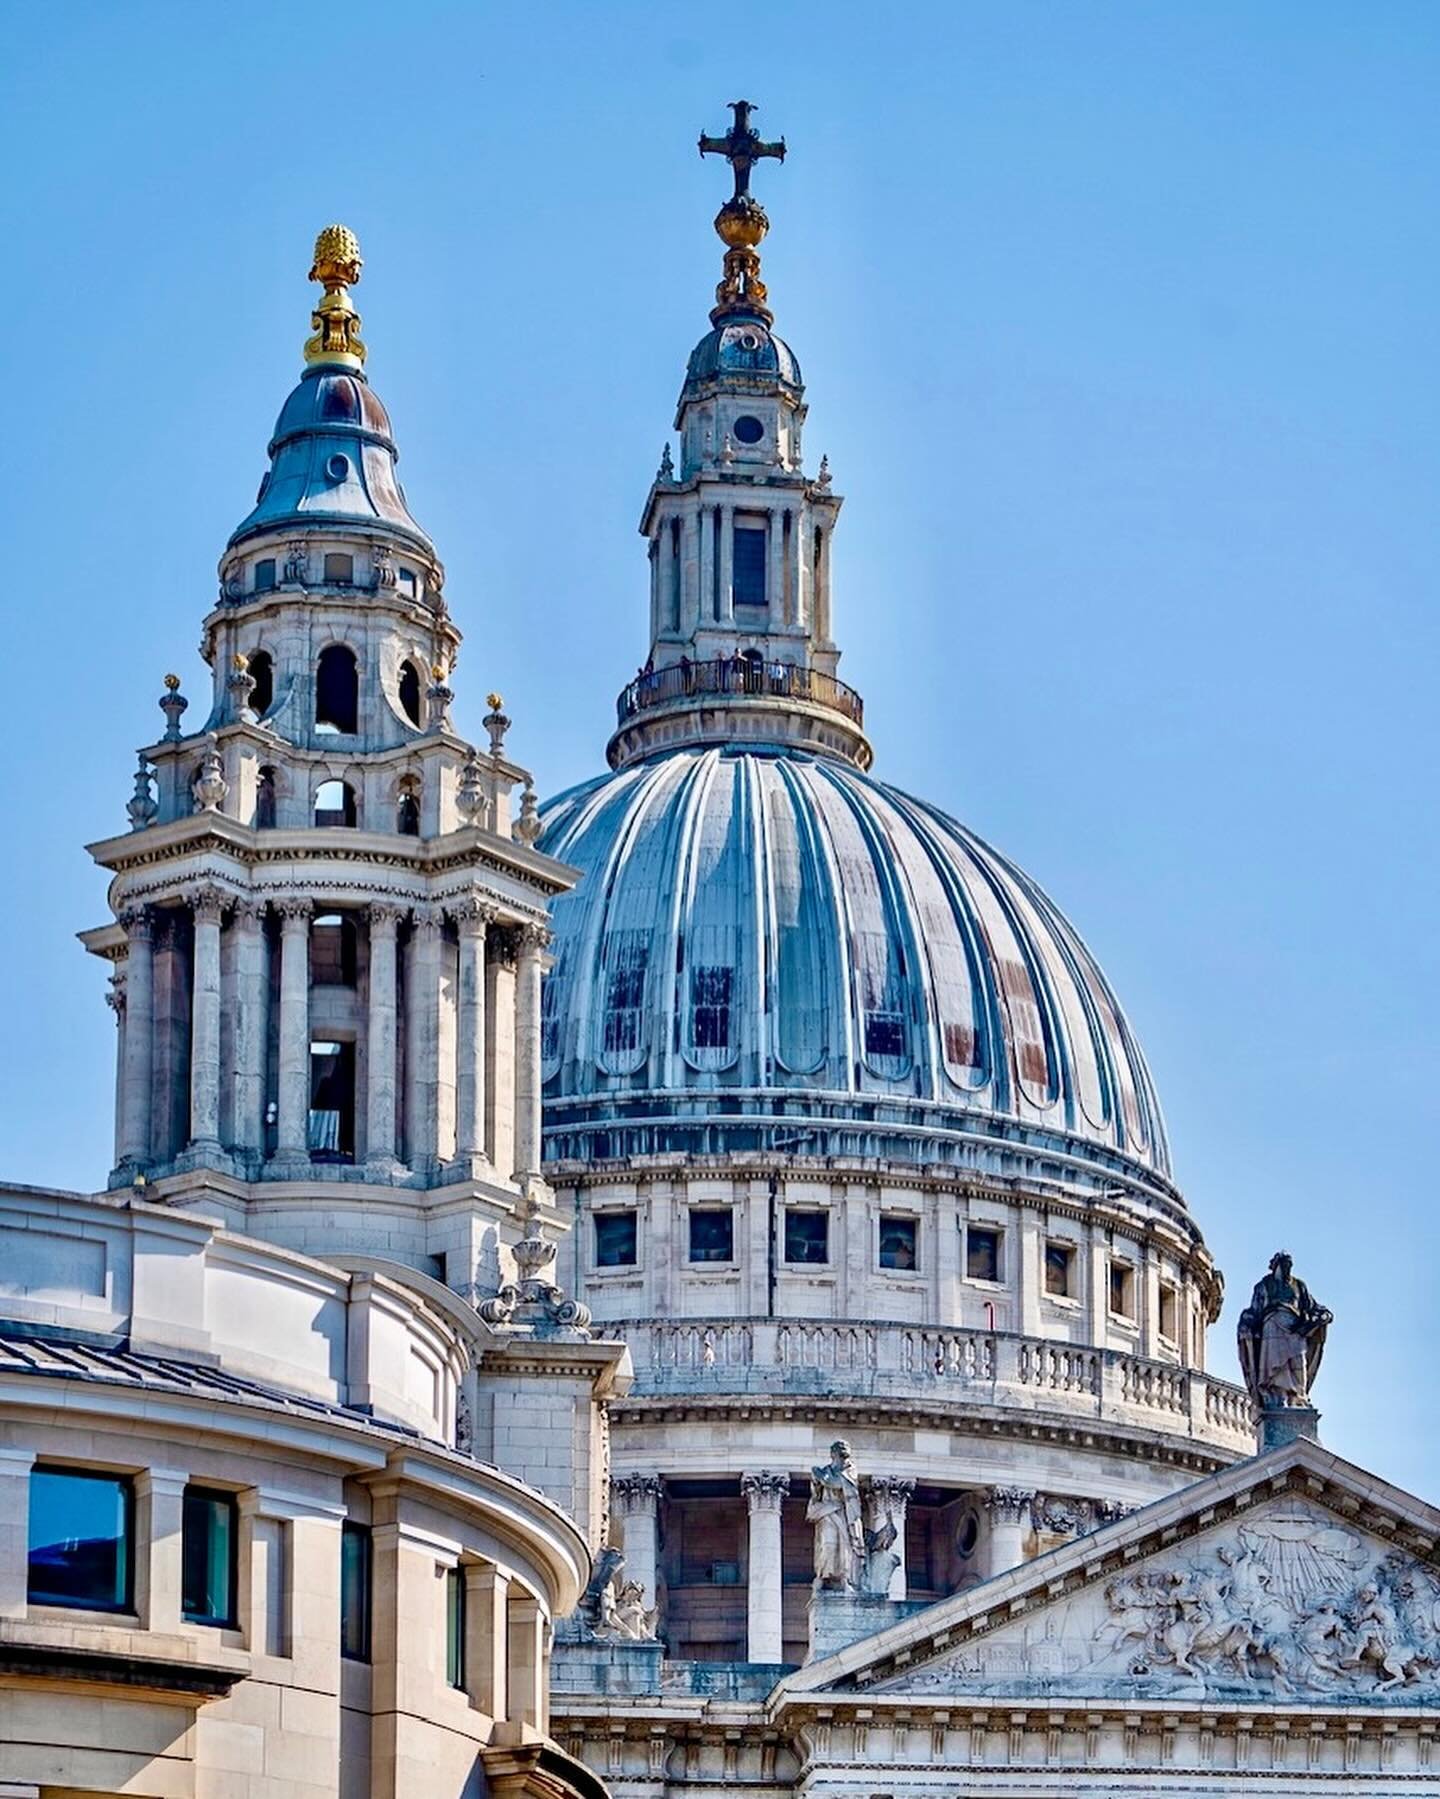 The dome of St. Paul&rsquo;s Cathedral is among the most iconic sights of the London skyline.  
The famous cathedral atop Ludgate Hill, the fifth built on that site since St. Paul&rsquo;s founding in 604 AD, was constructed after the previous church 